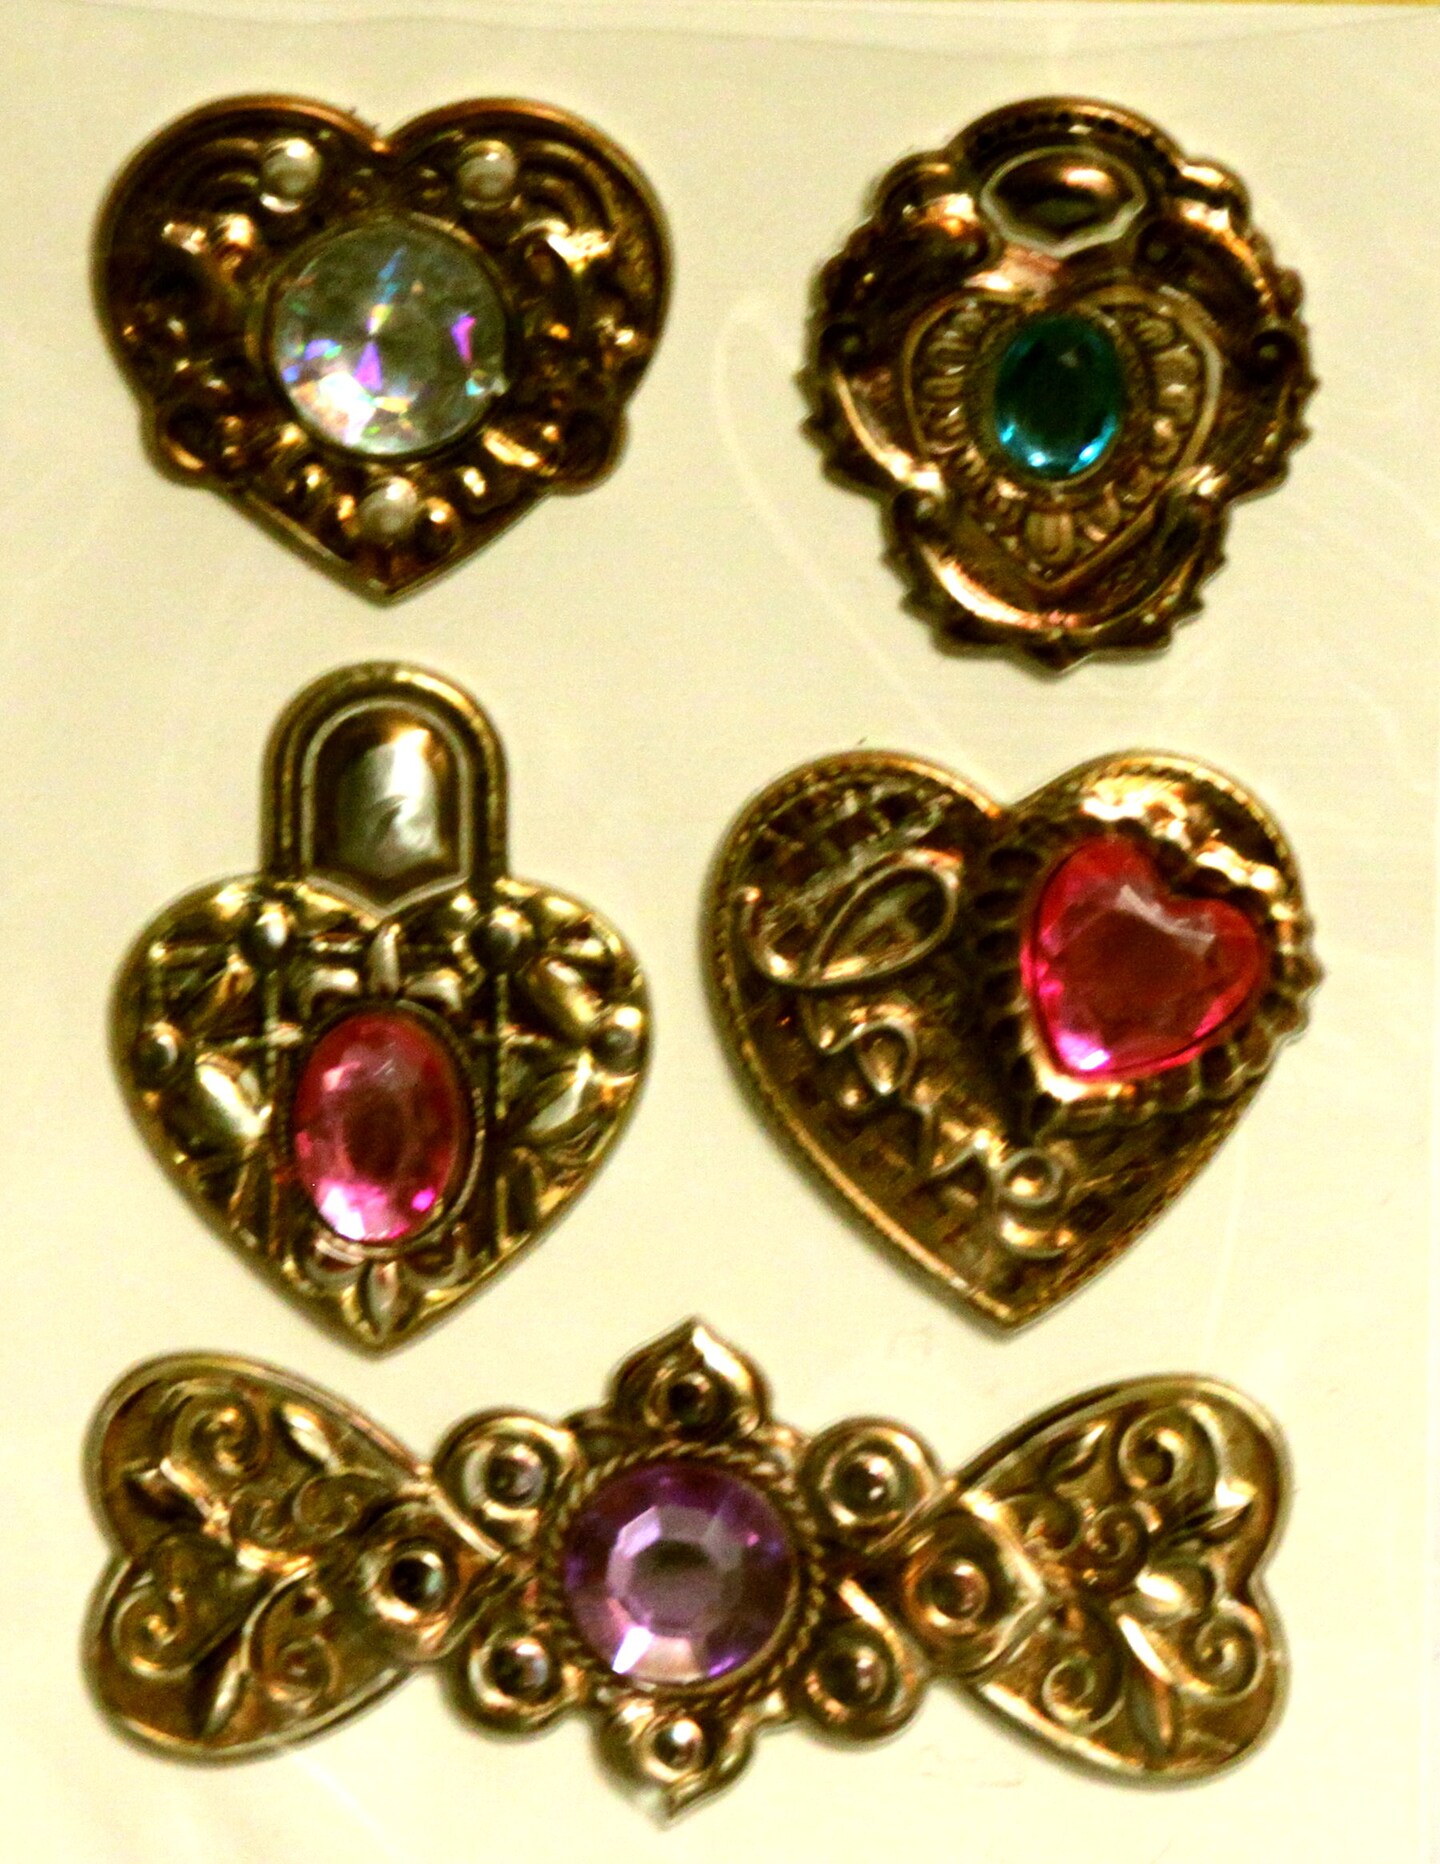 Designer Vintage Hearts Jeweled Dimensional Puffy Stickers